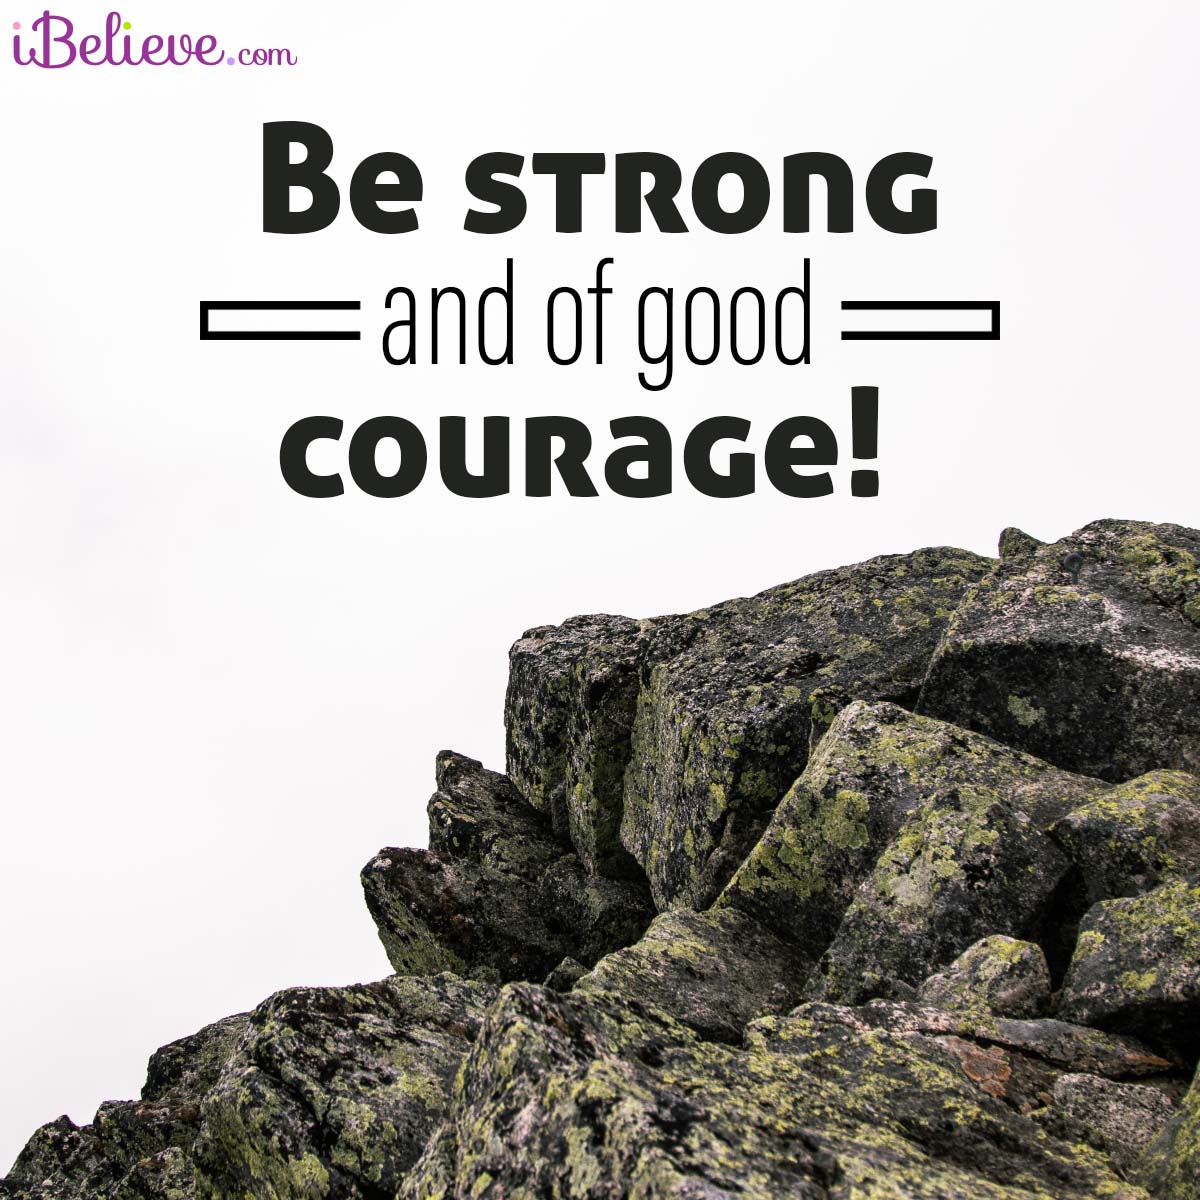 Be strong and of good courage, inspirational image